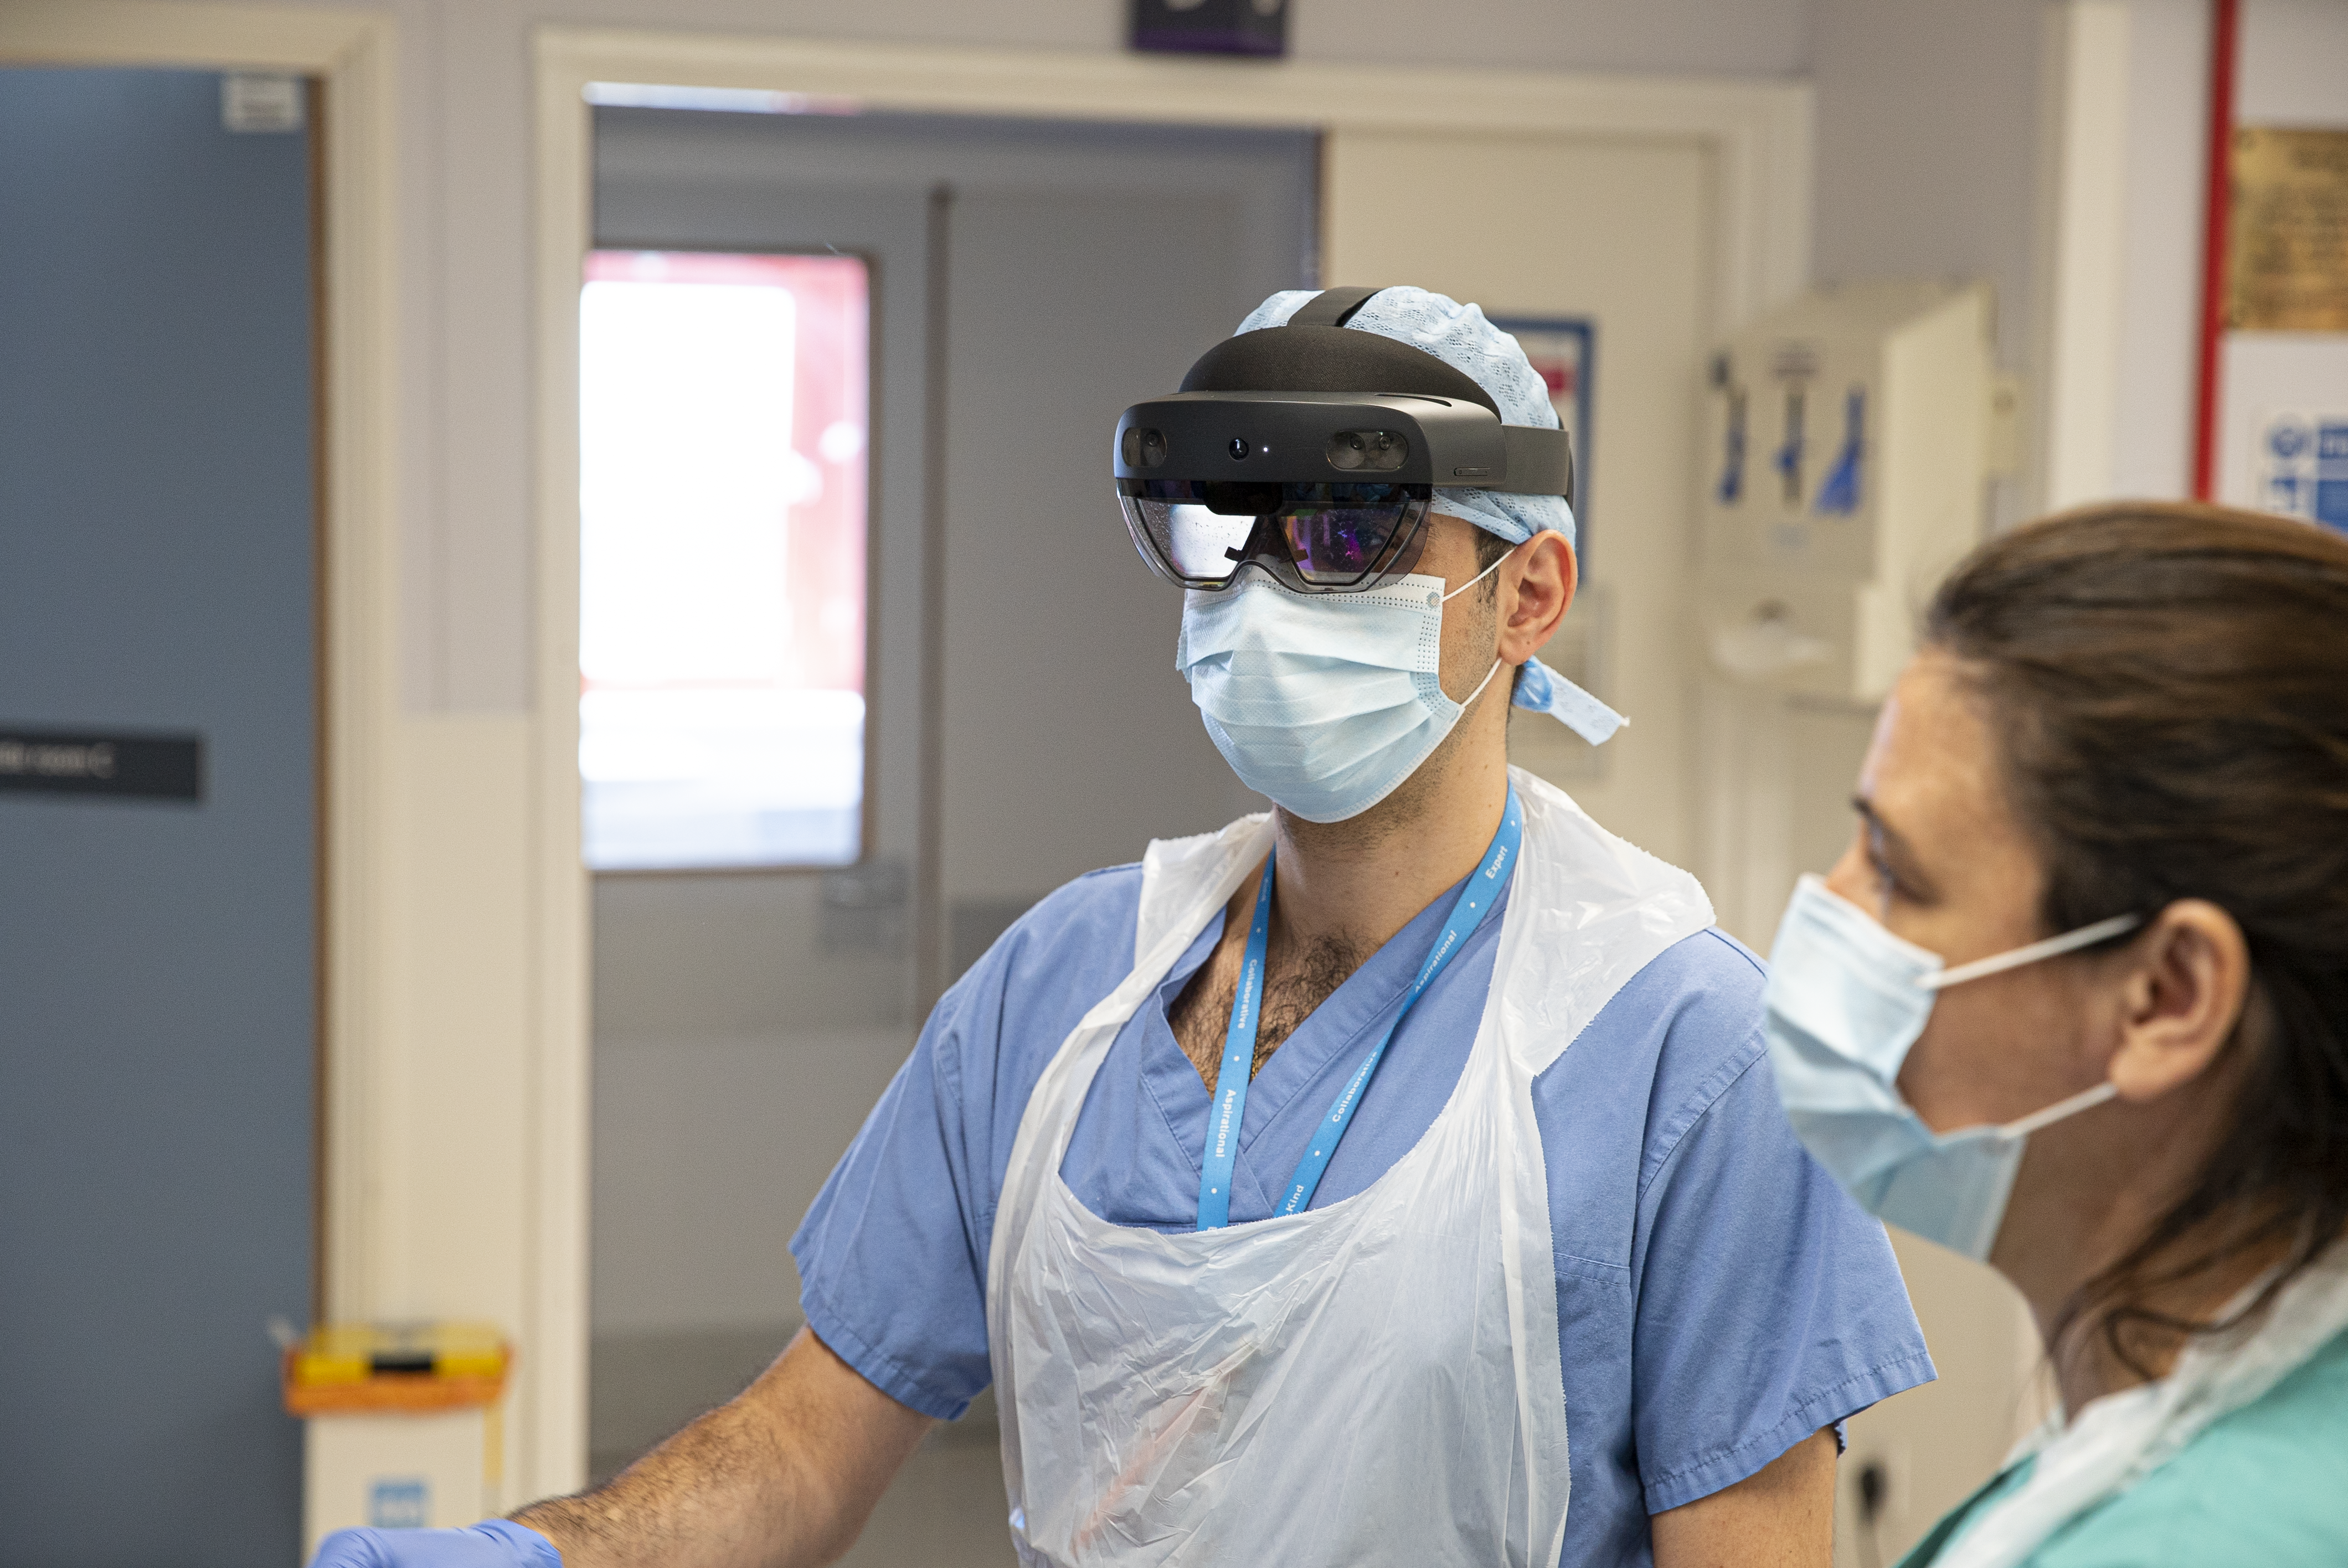 An NHS doctor wears HoloLens 2 and PPE